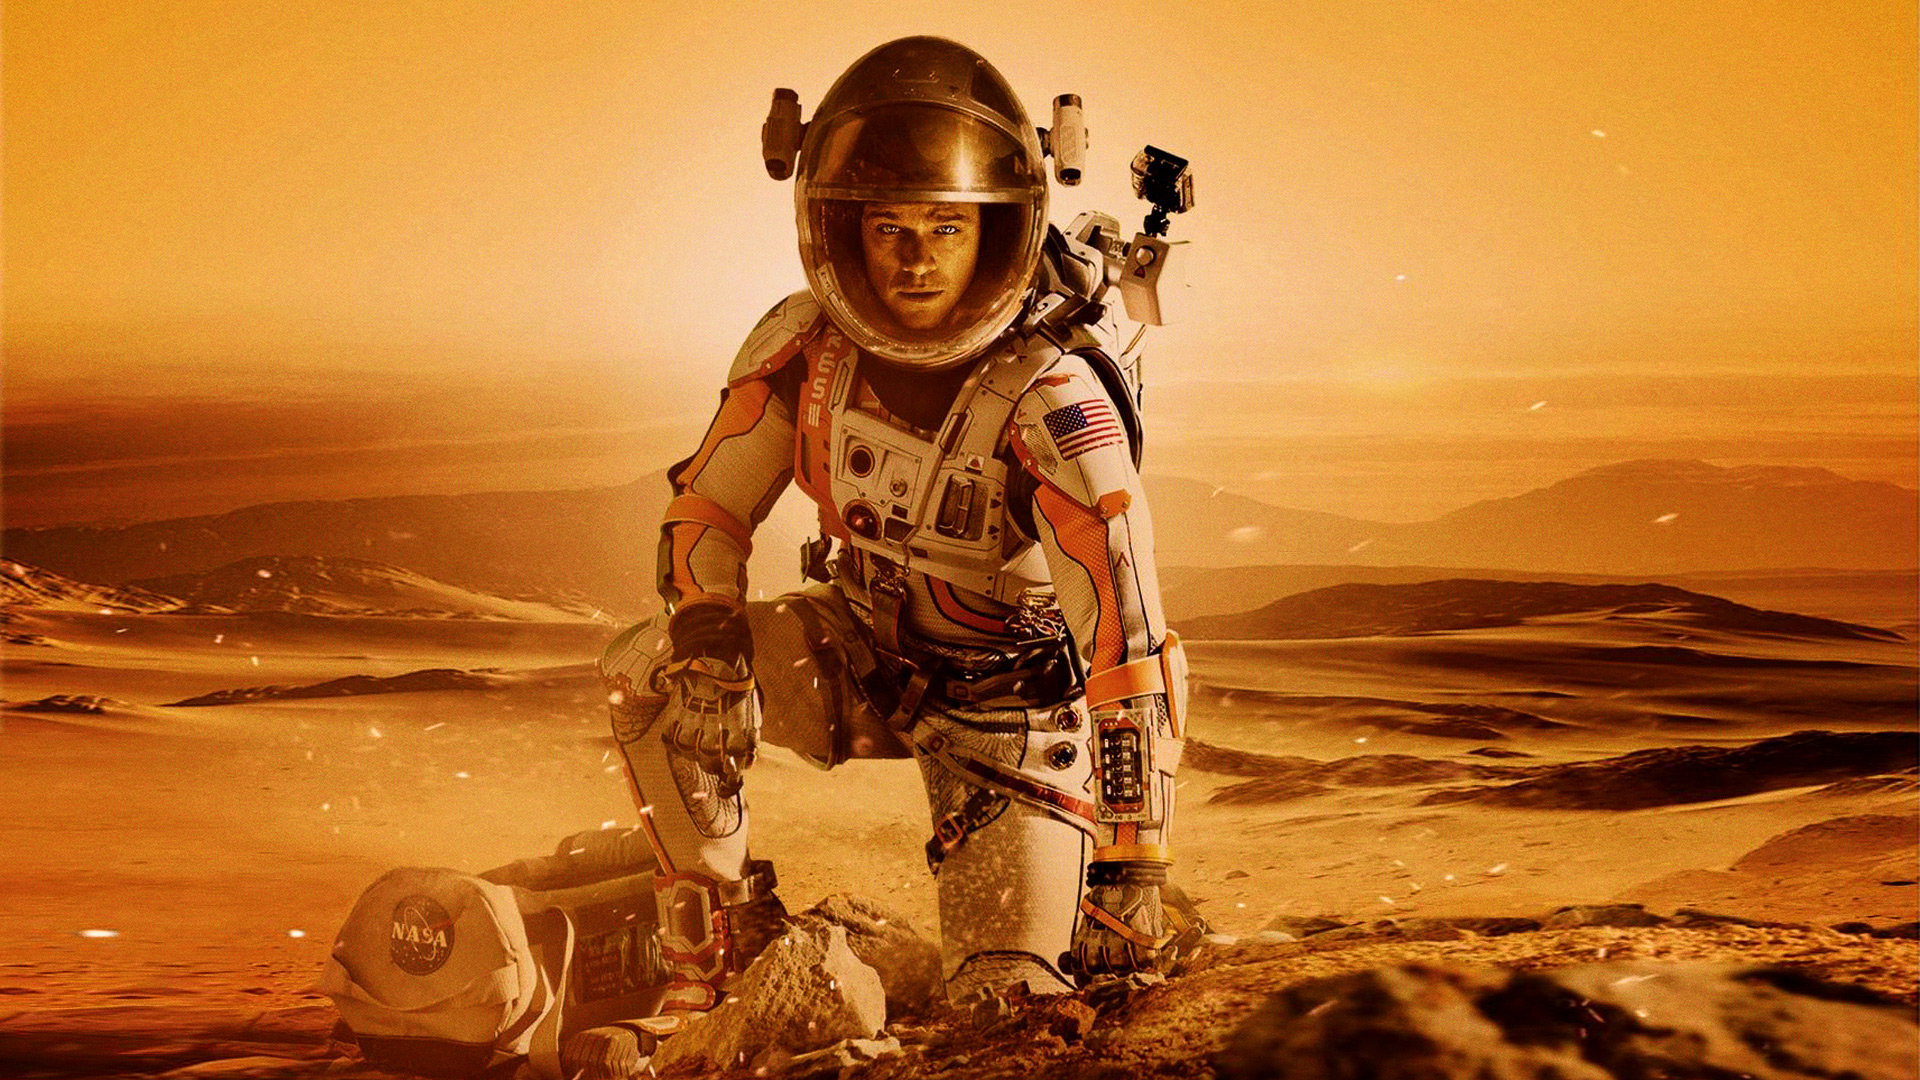 Download full hd 1920x1080 The Martian desktop background ID:165233 for free